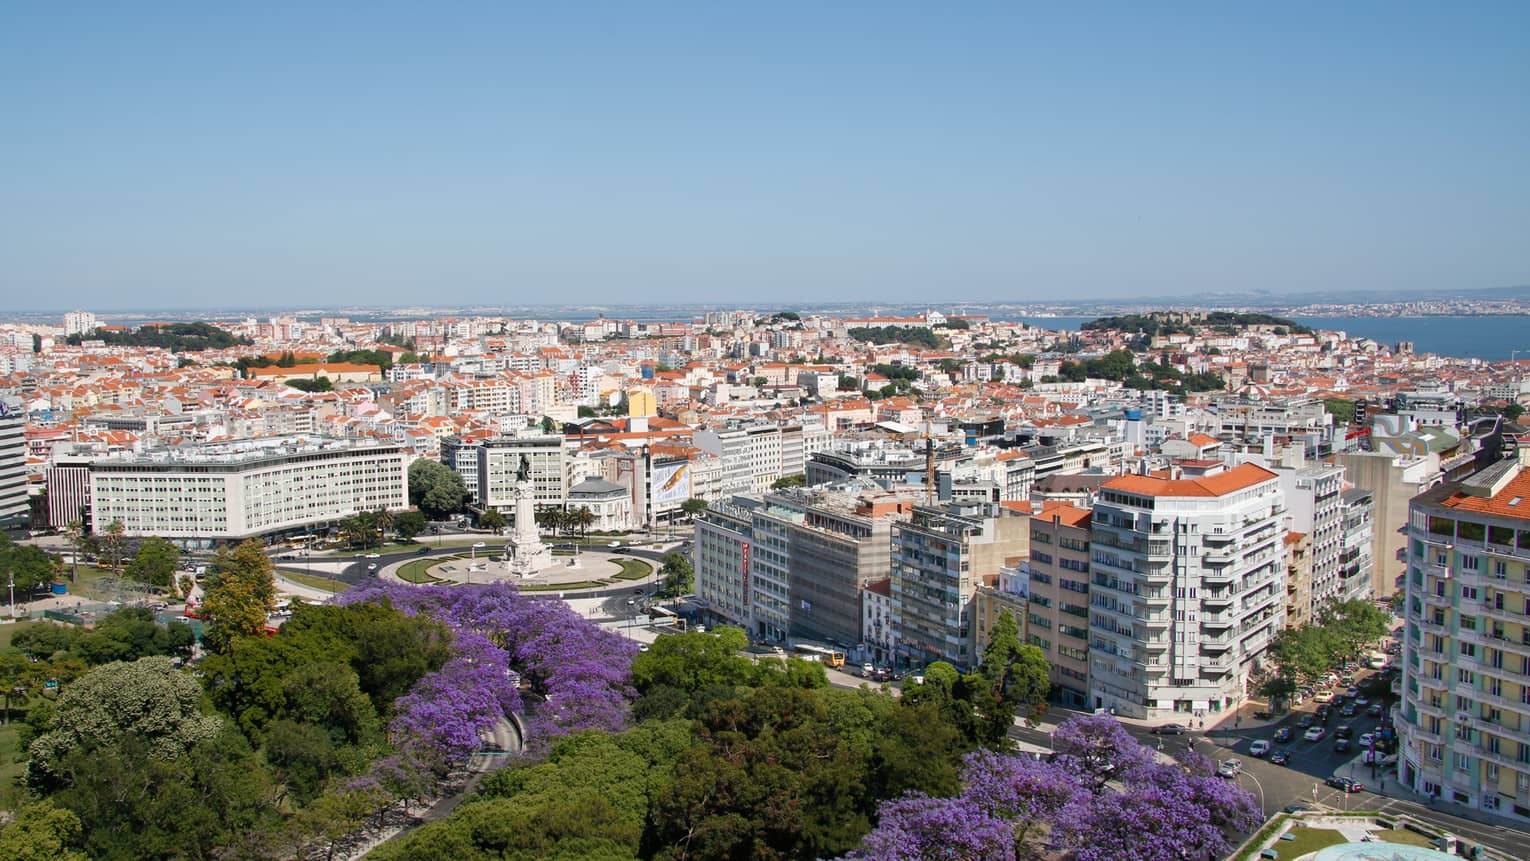 View over sunny Lisbon skyline with gardens, high rise buildings, rooftops